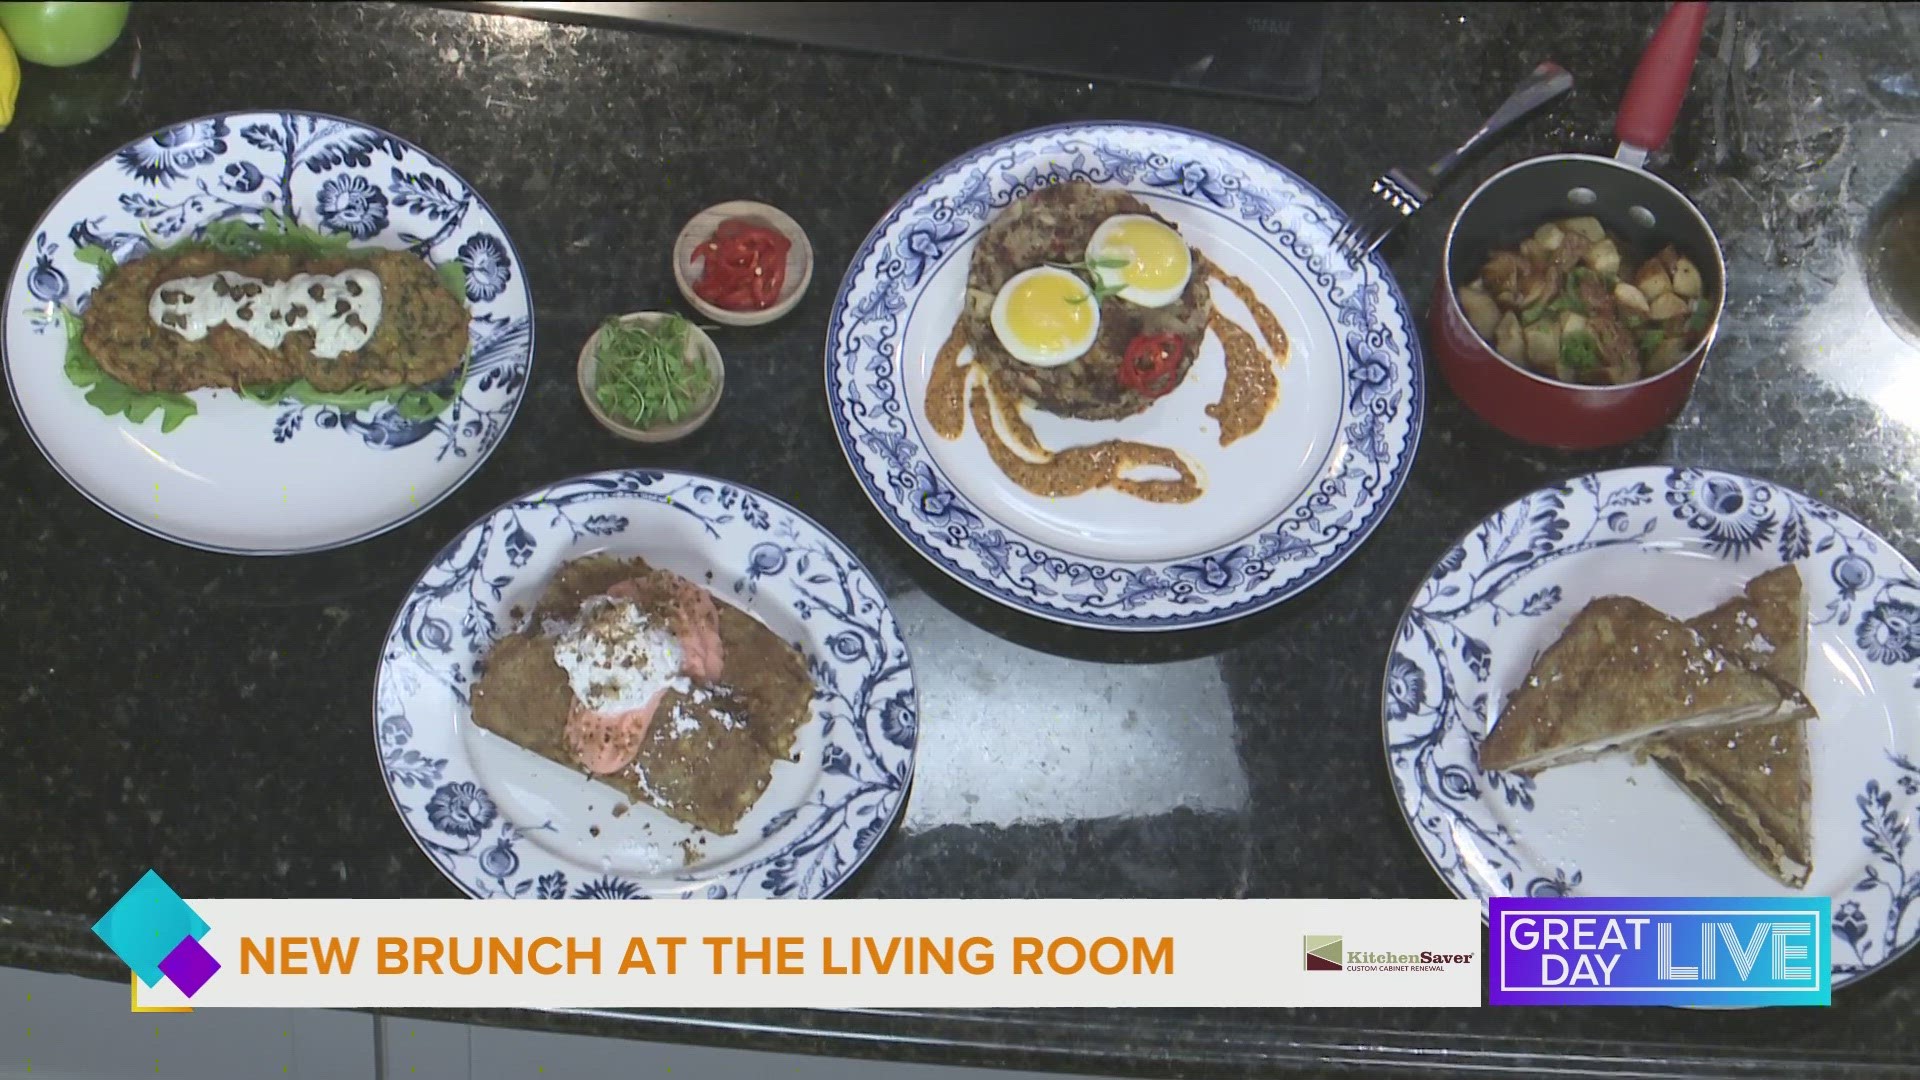 From breakfast to cocktails, the Living Room at Wiregrass is launching a brand-new brunch menu. You can check it out at www.tlr.restaurant